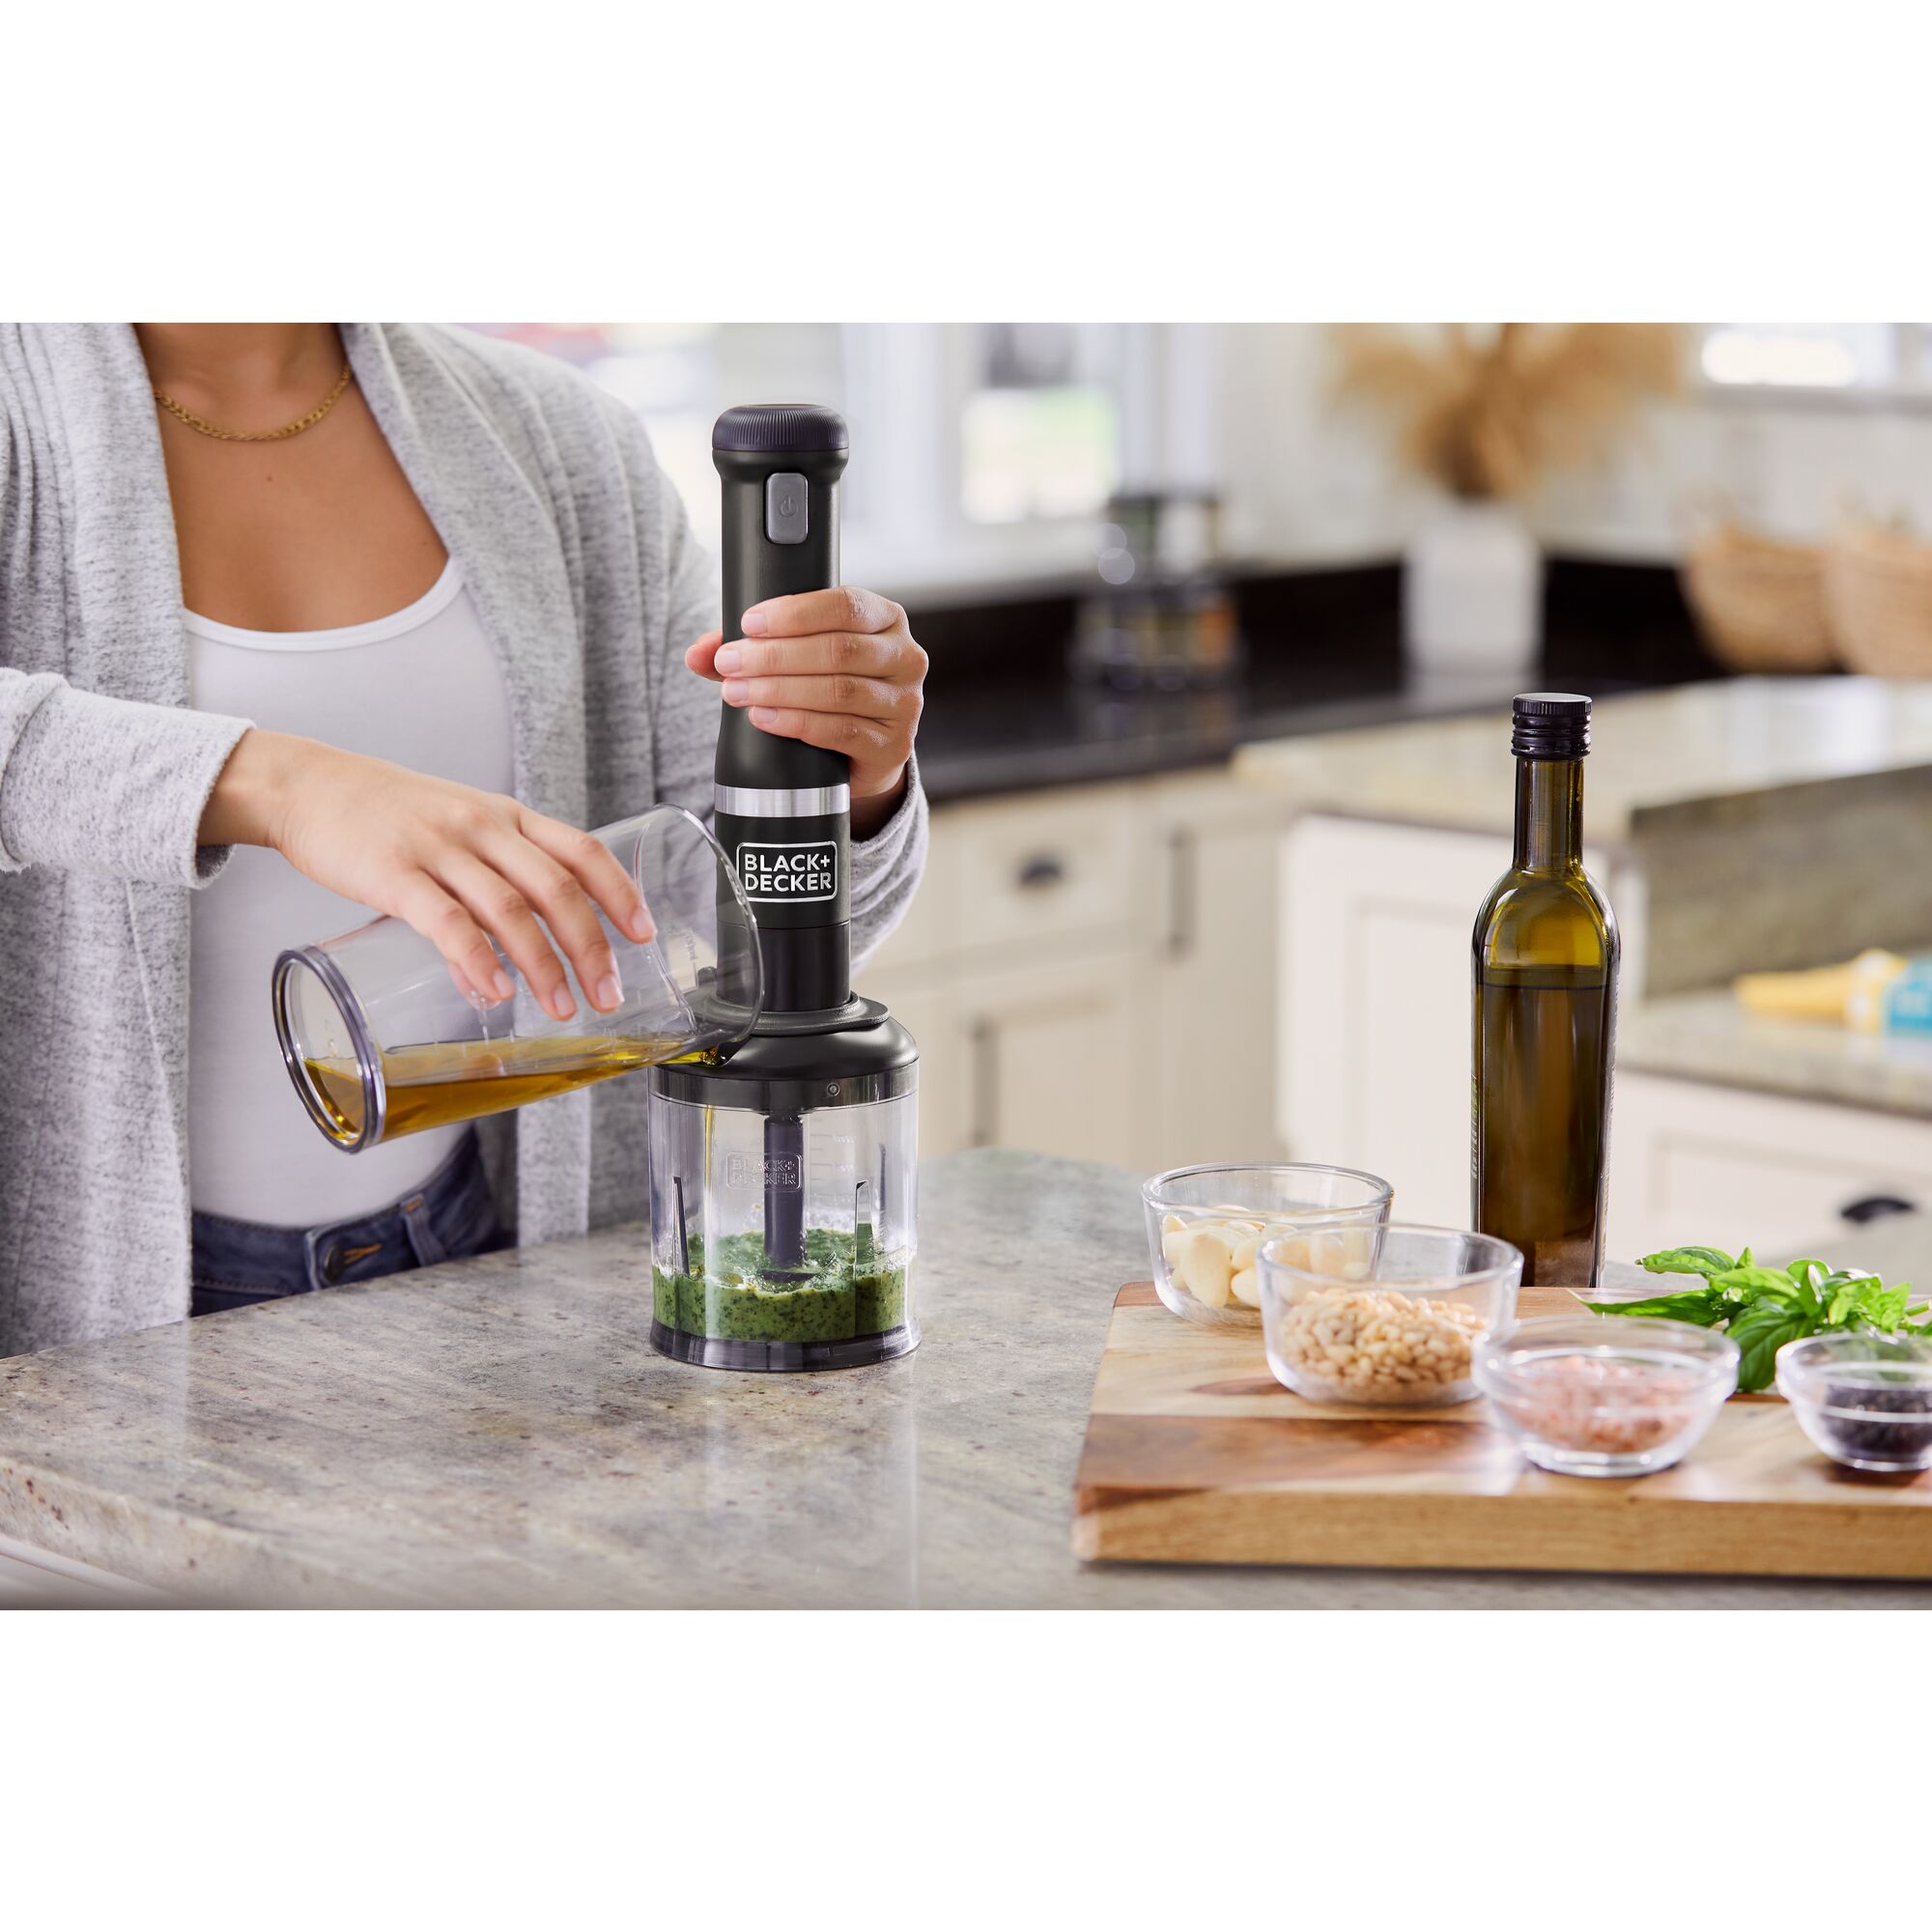 Model pouring olive oil in through the port of the BLACK+DECKER kitchen wand food chopper attachment